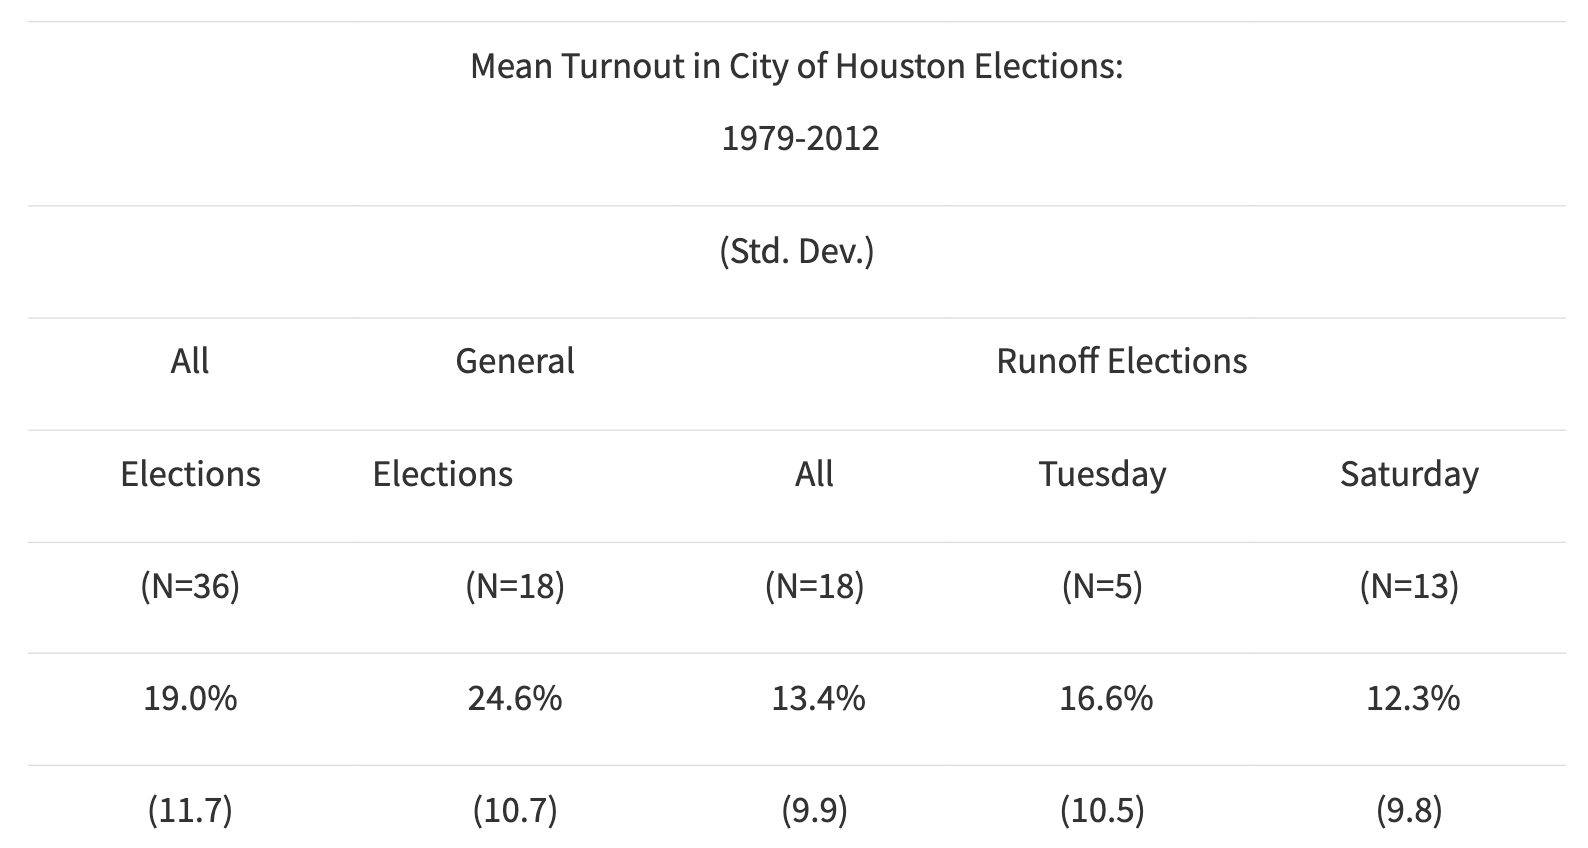 This table compares mean turnout in Houston general and runoff elections.